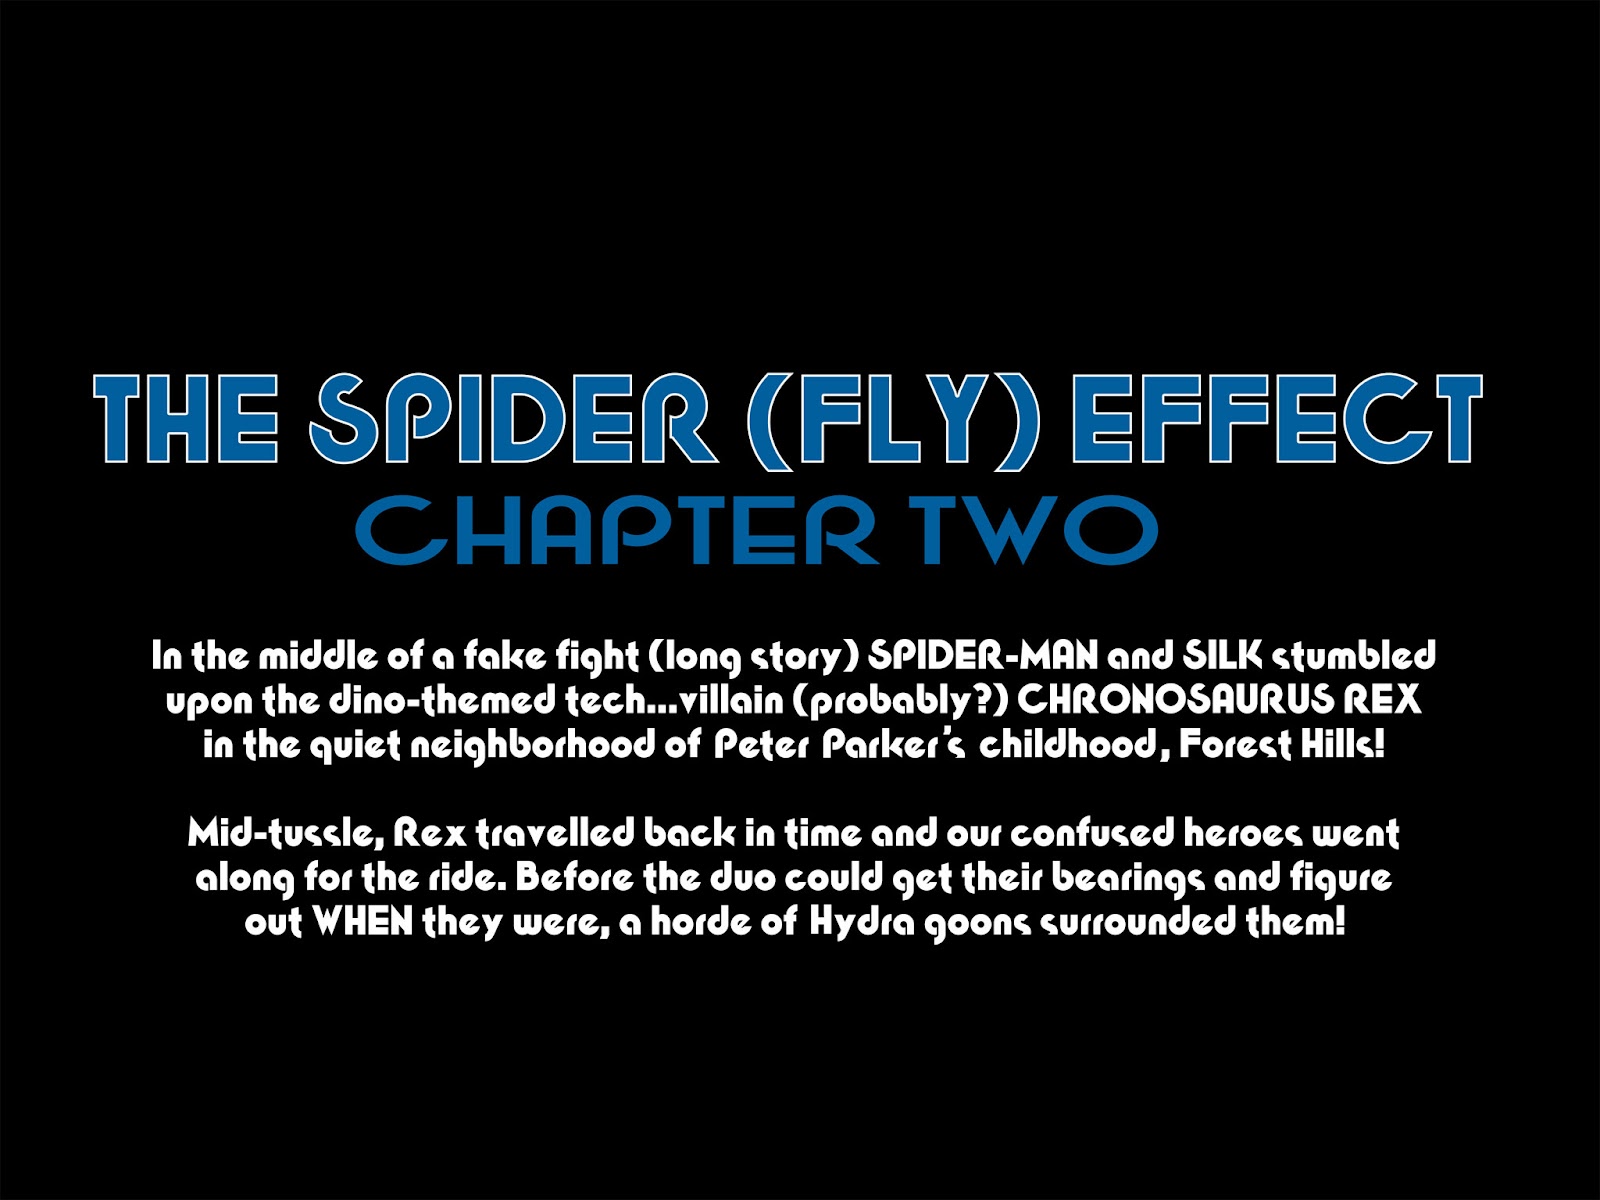 The Amazing Spider-Man & Silk: The Spider(fly) Effect (Infinite Comics) issue 2 - Page 9